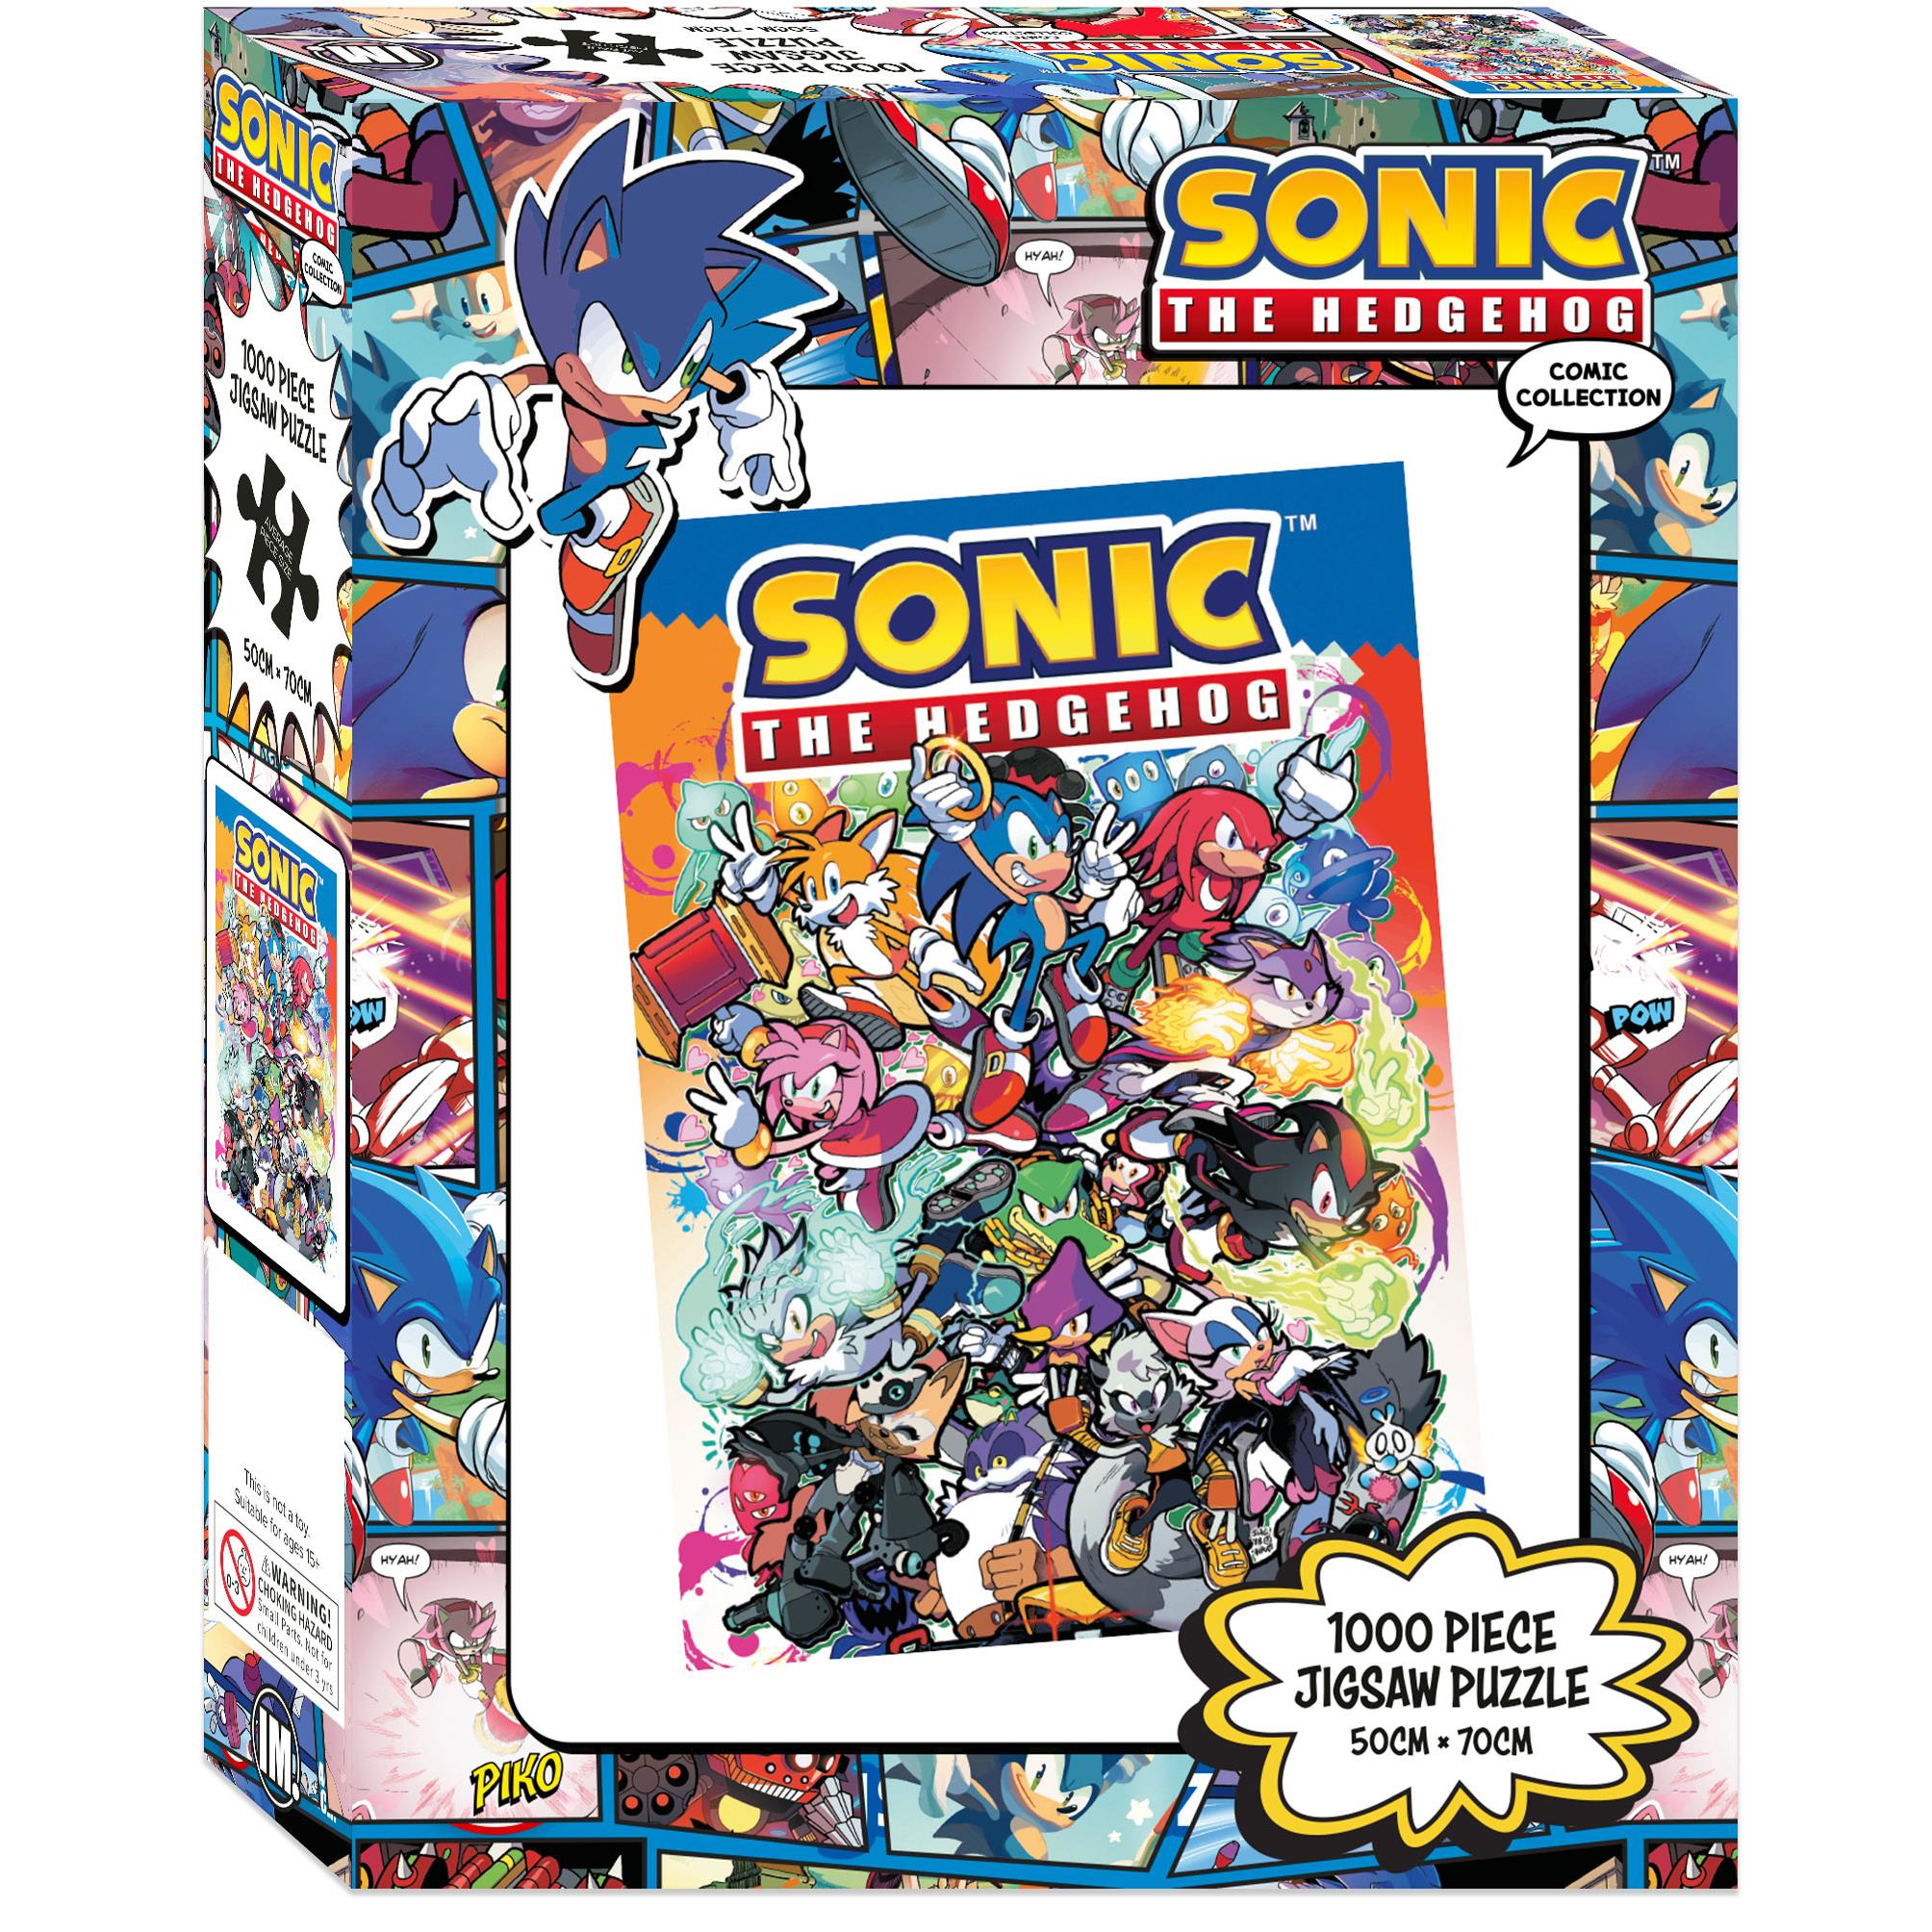 sonic the hedgehog - 1000 piece jigsaw puzzle